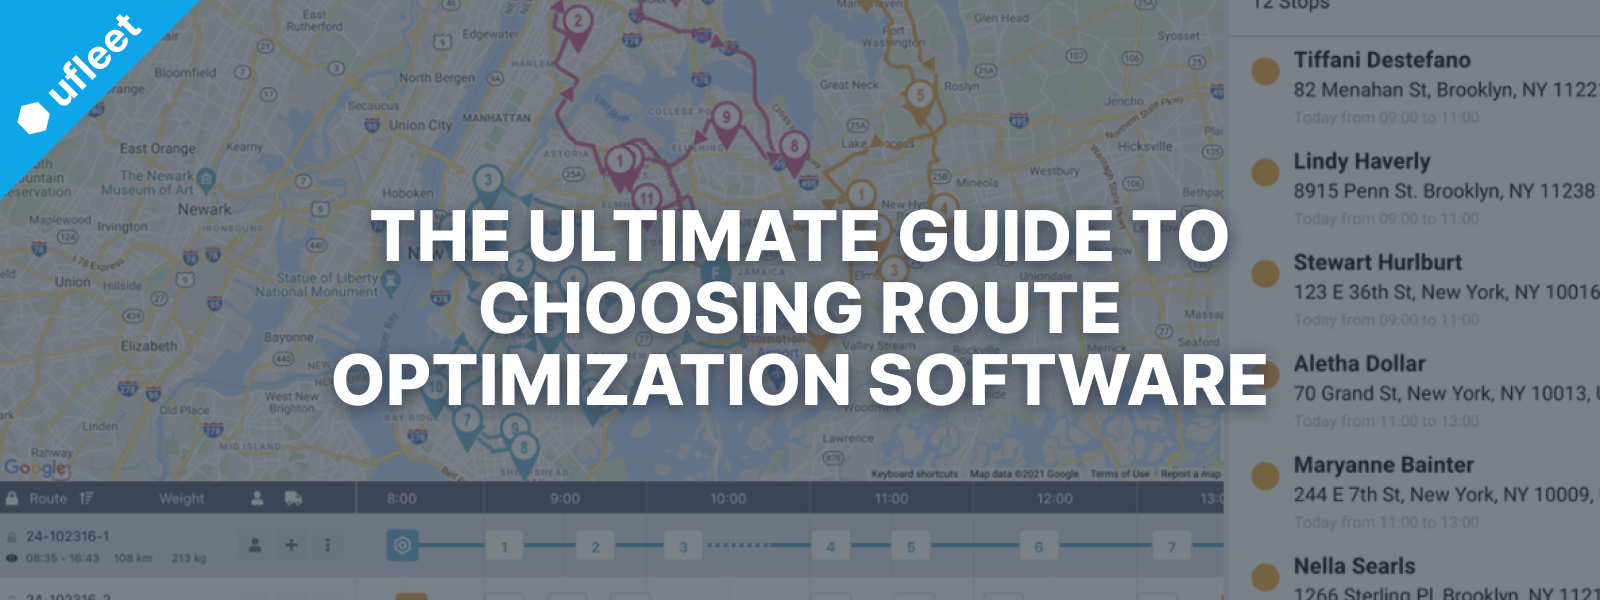 The Ultimate Guide to Picking Route Optimization Software